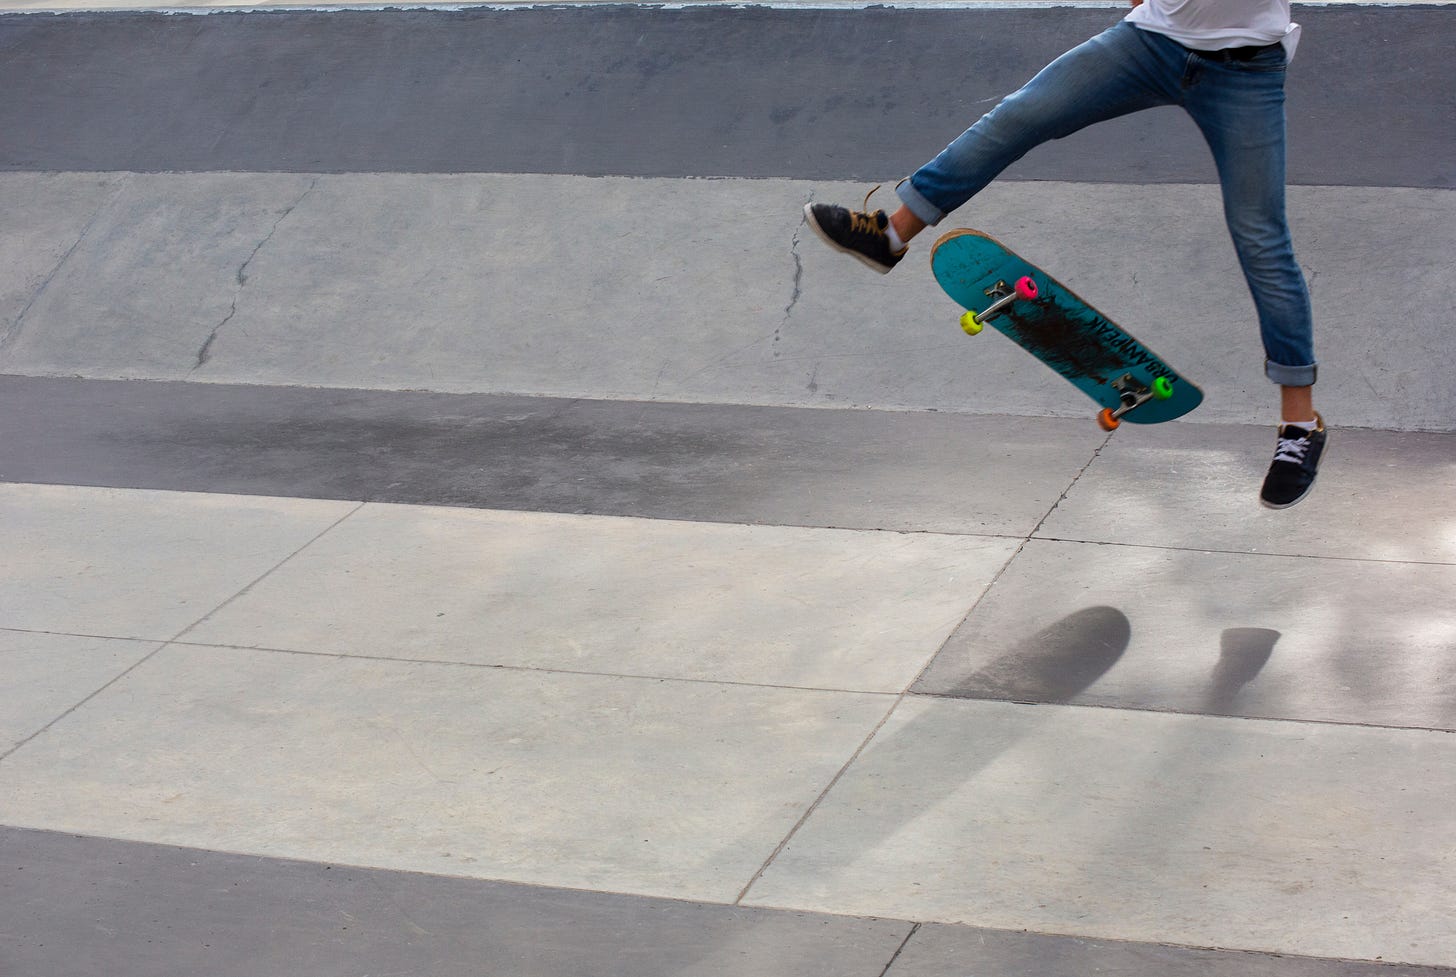 In the picture, the lower half of a person is seen in the upper right, jumping in the air. Between their legs is a blue and black skateboard. The person is wearing jeans and black shoes. The ground beneath them is gray and white concrete.